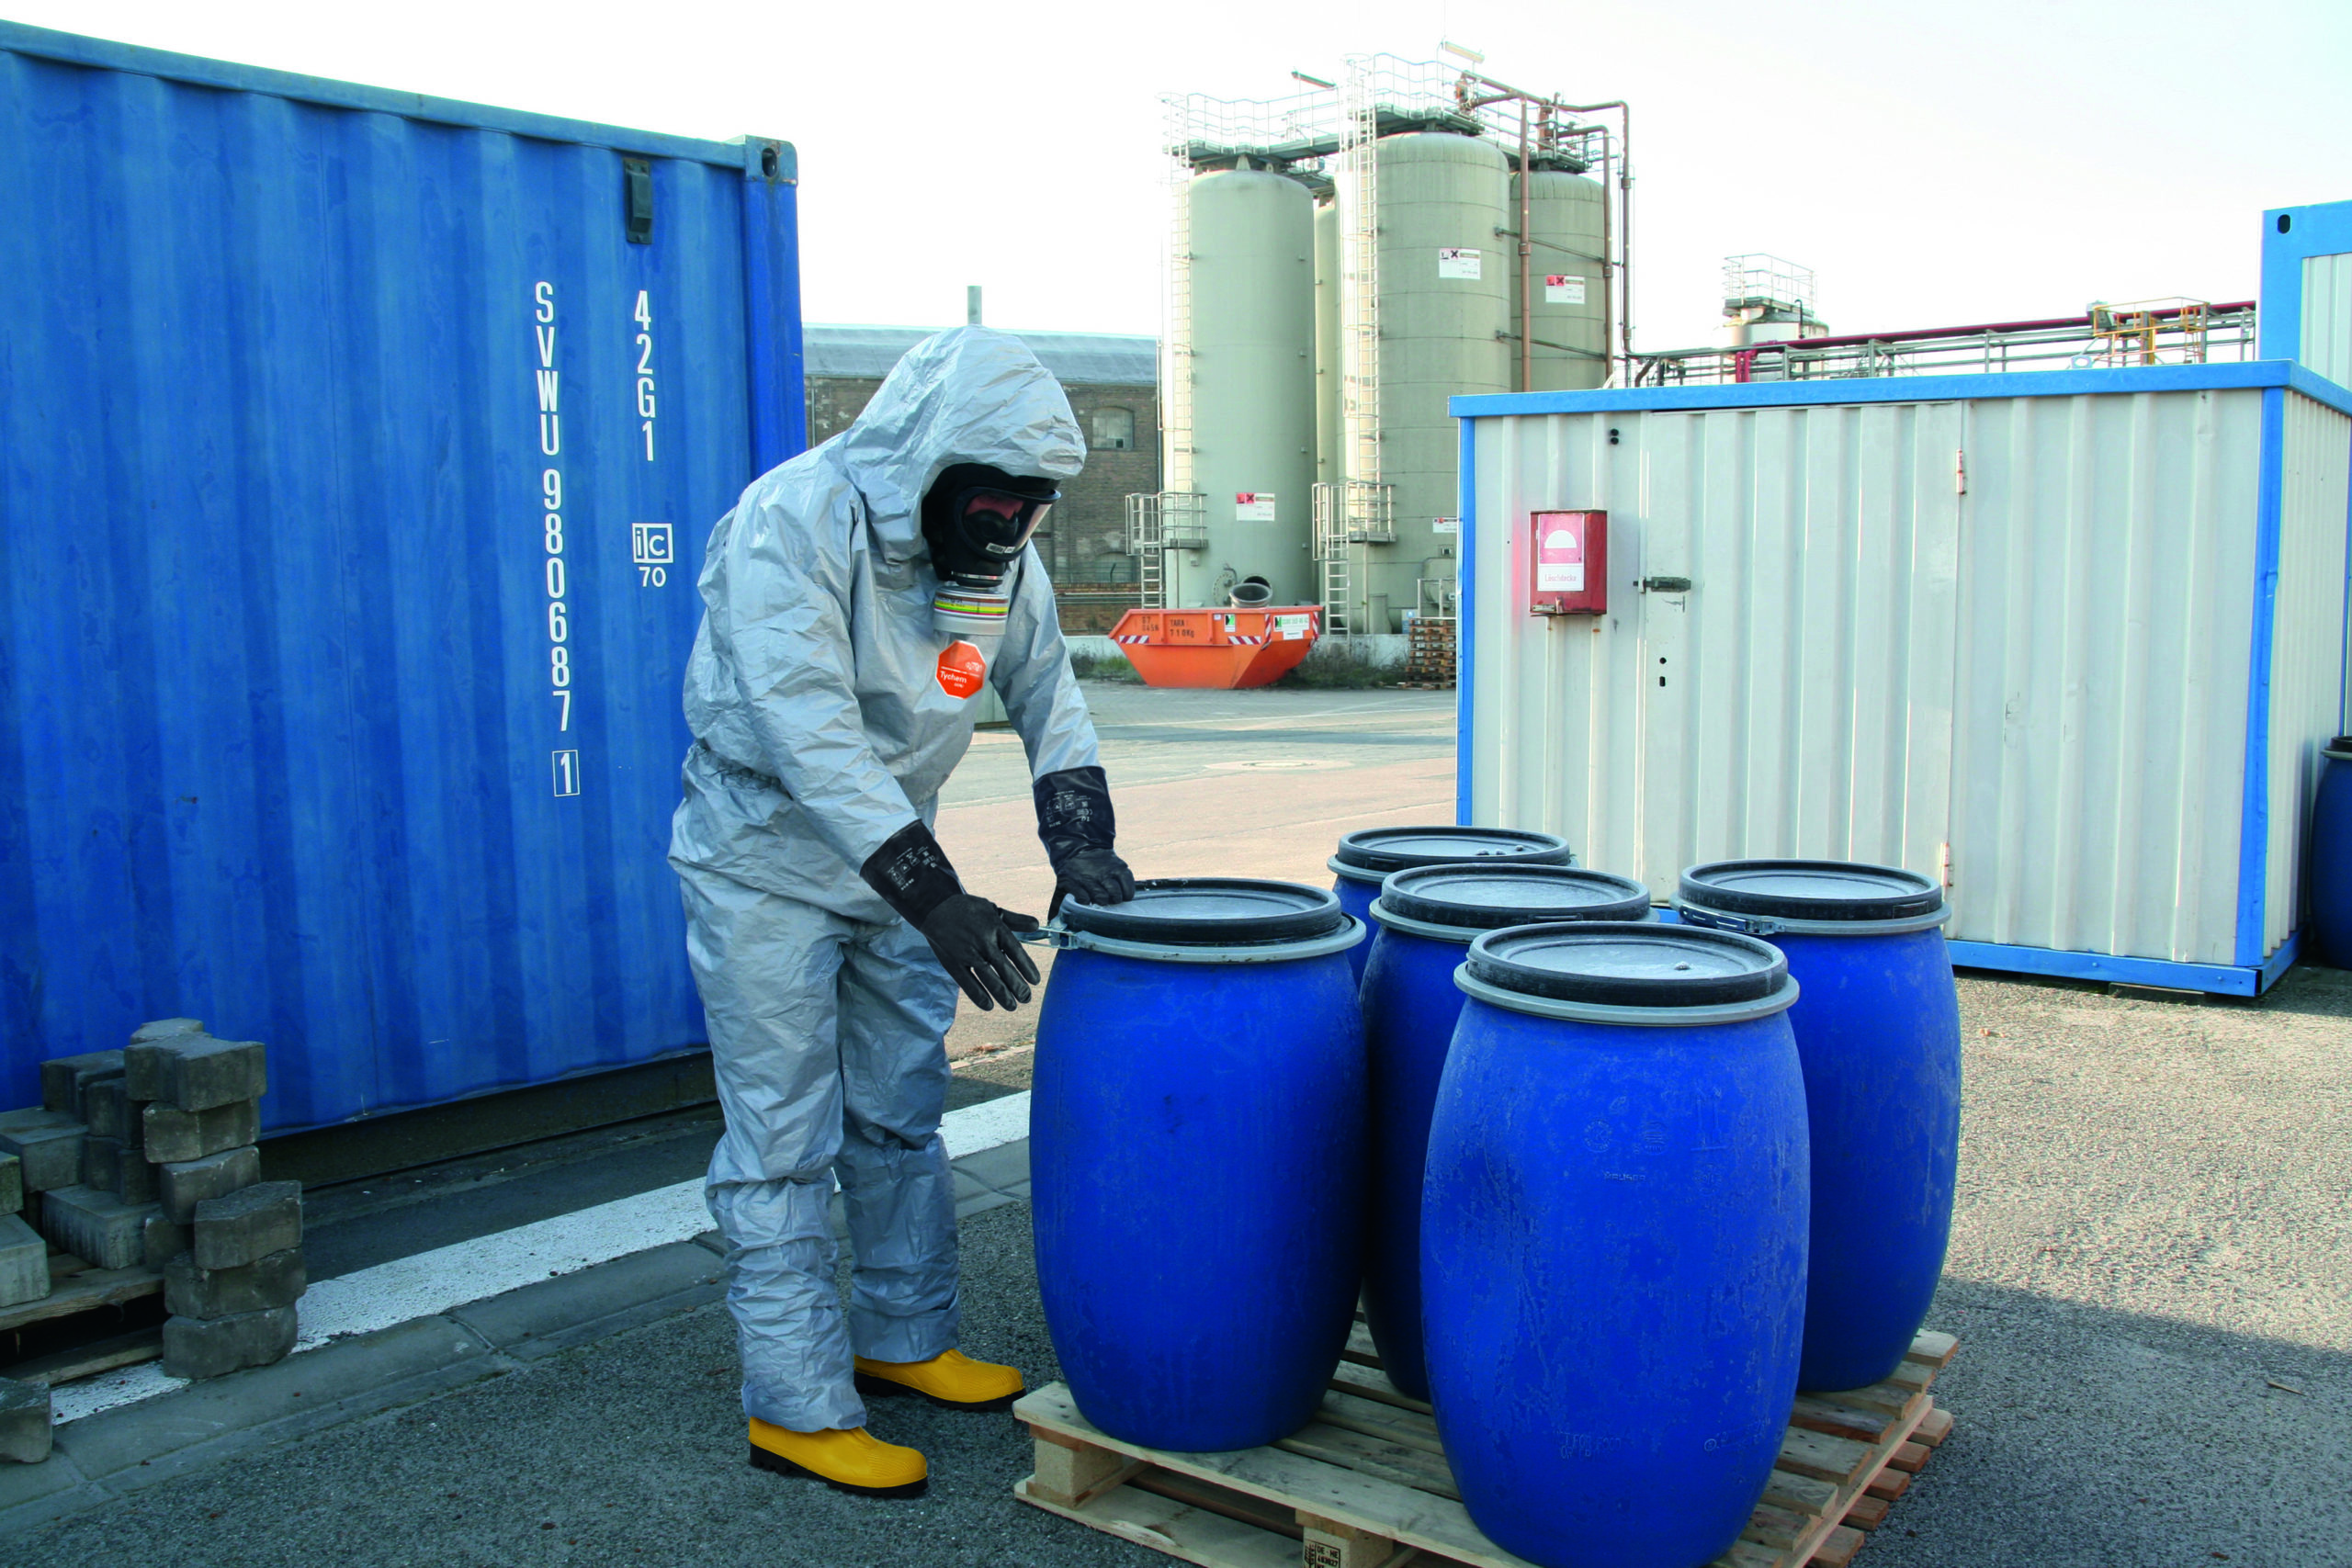 Protective clothing Protection against biological & chemical hazards